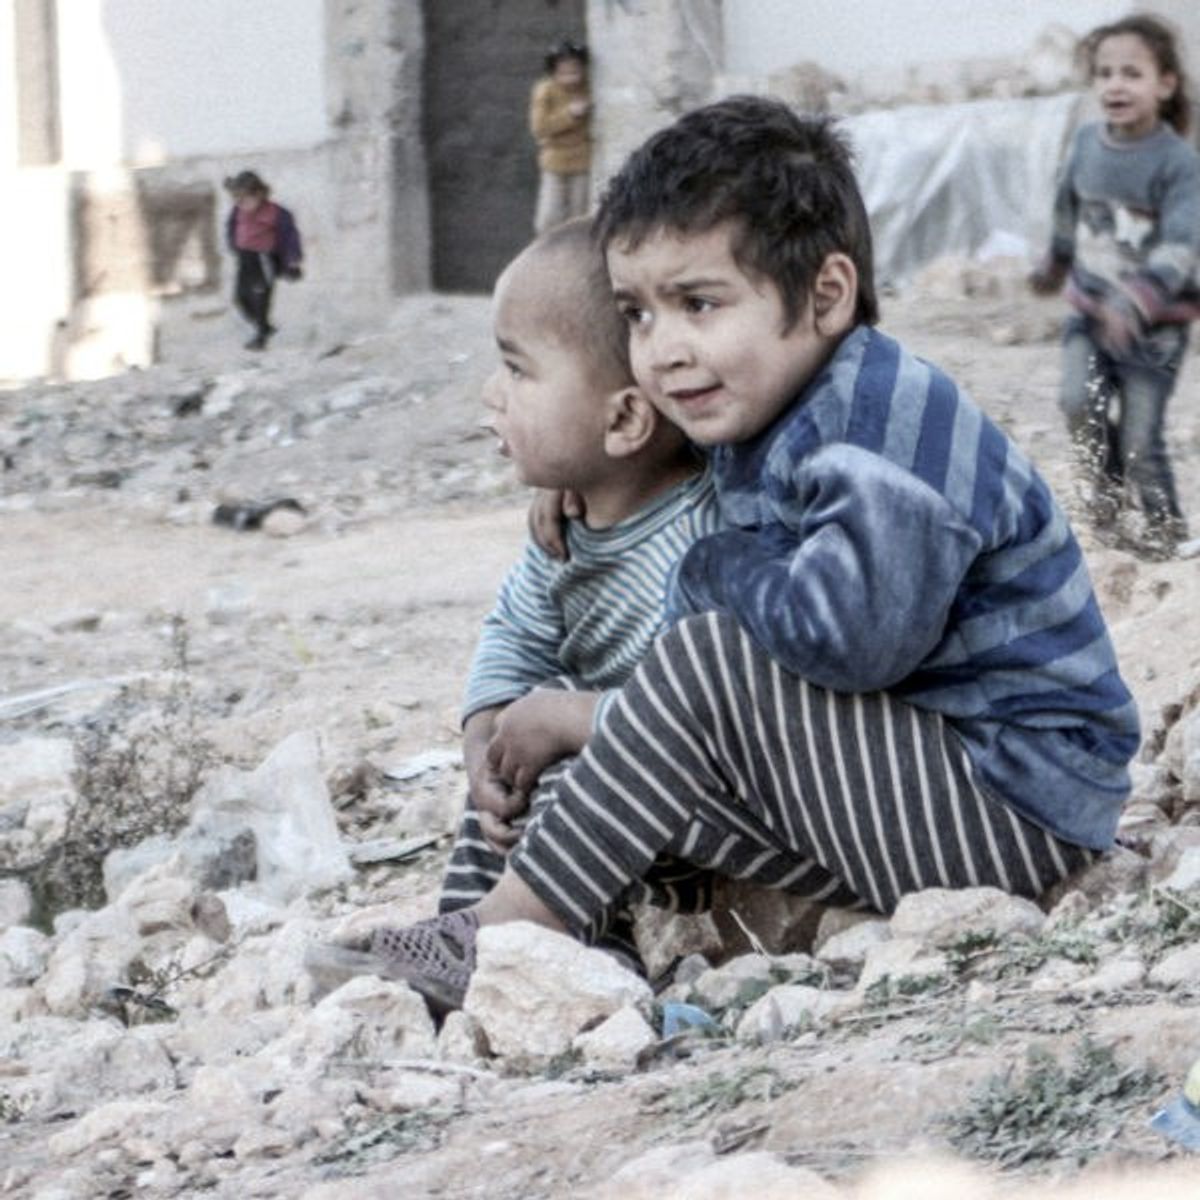 Real Talk: The Syrian Refugee Crisis